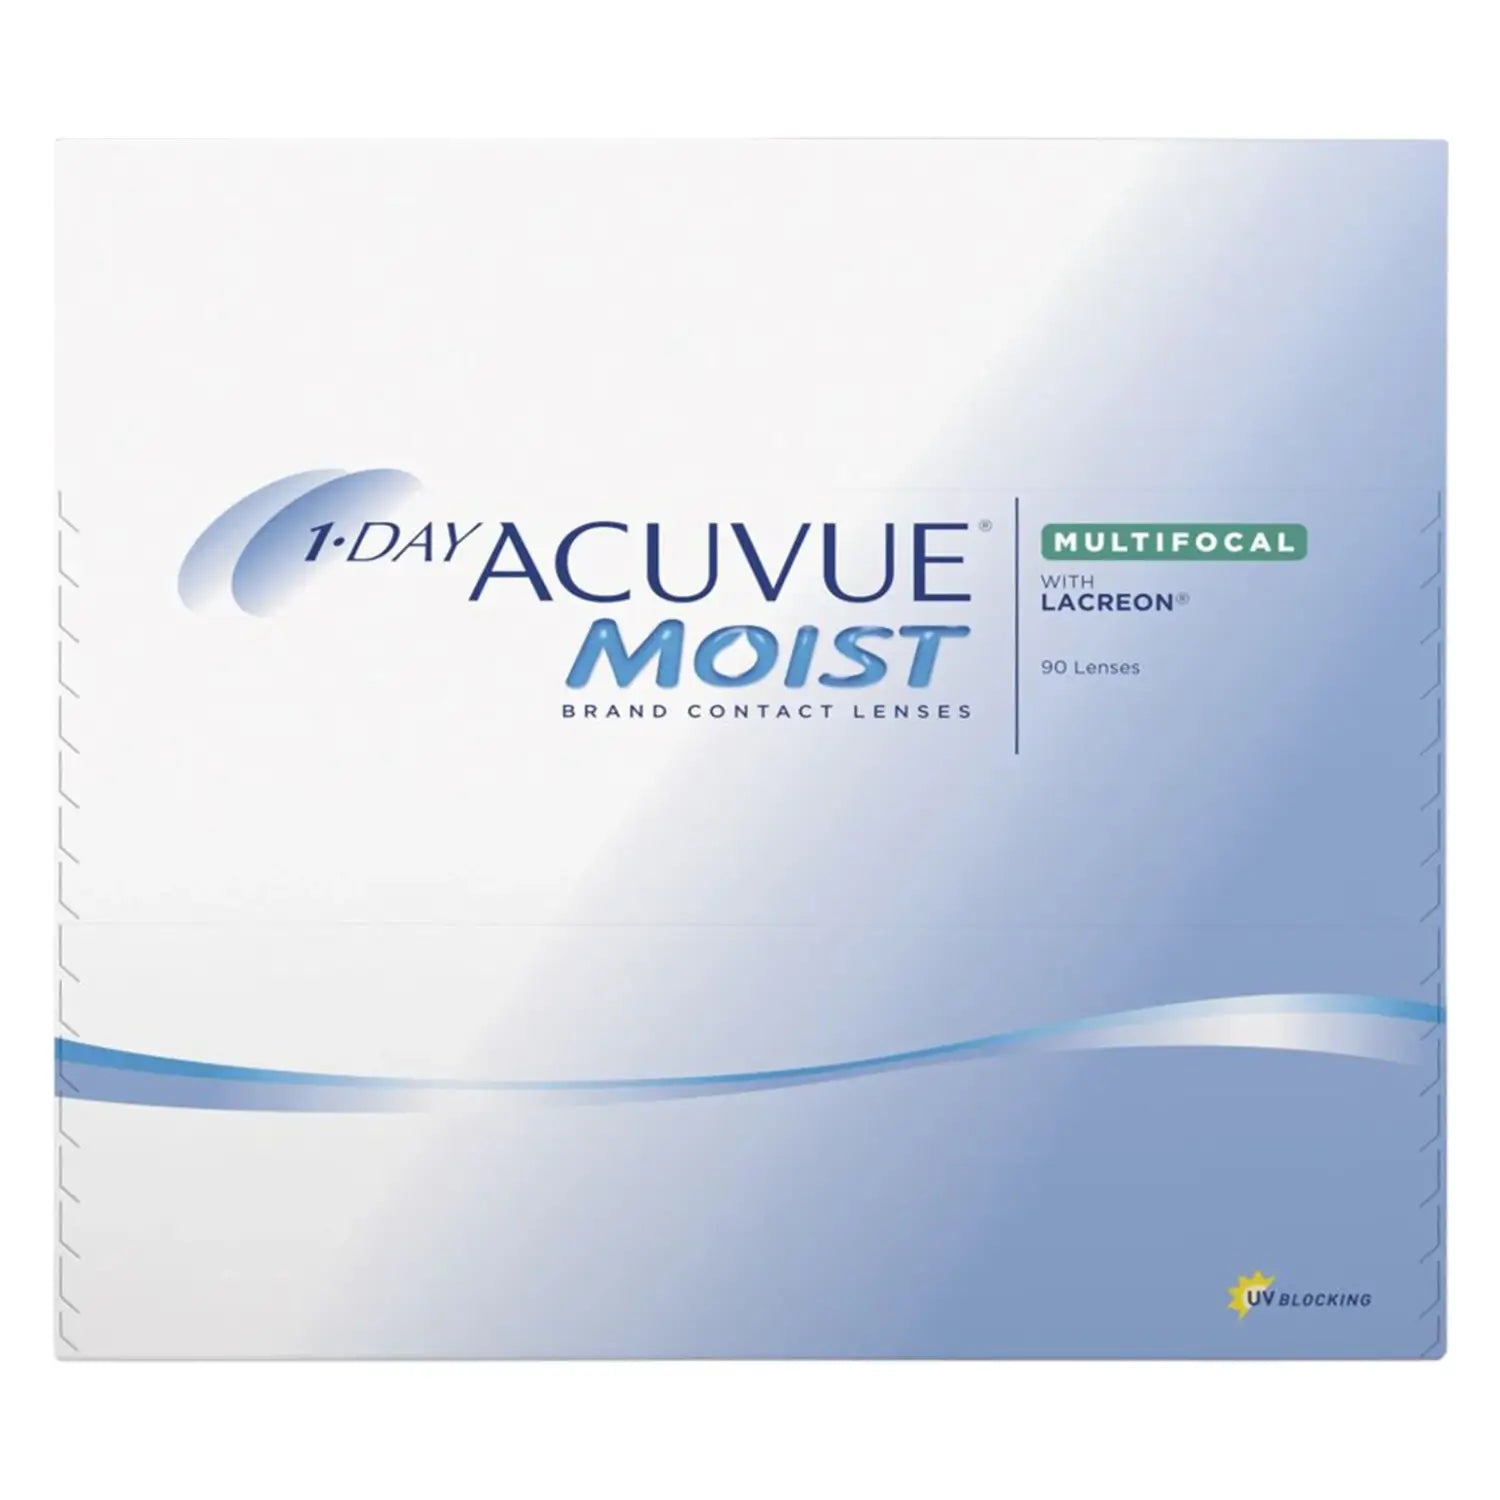 Acuvue moist certified contact lenses online at best price